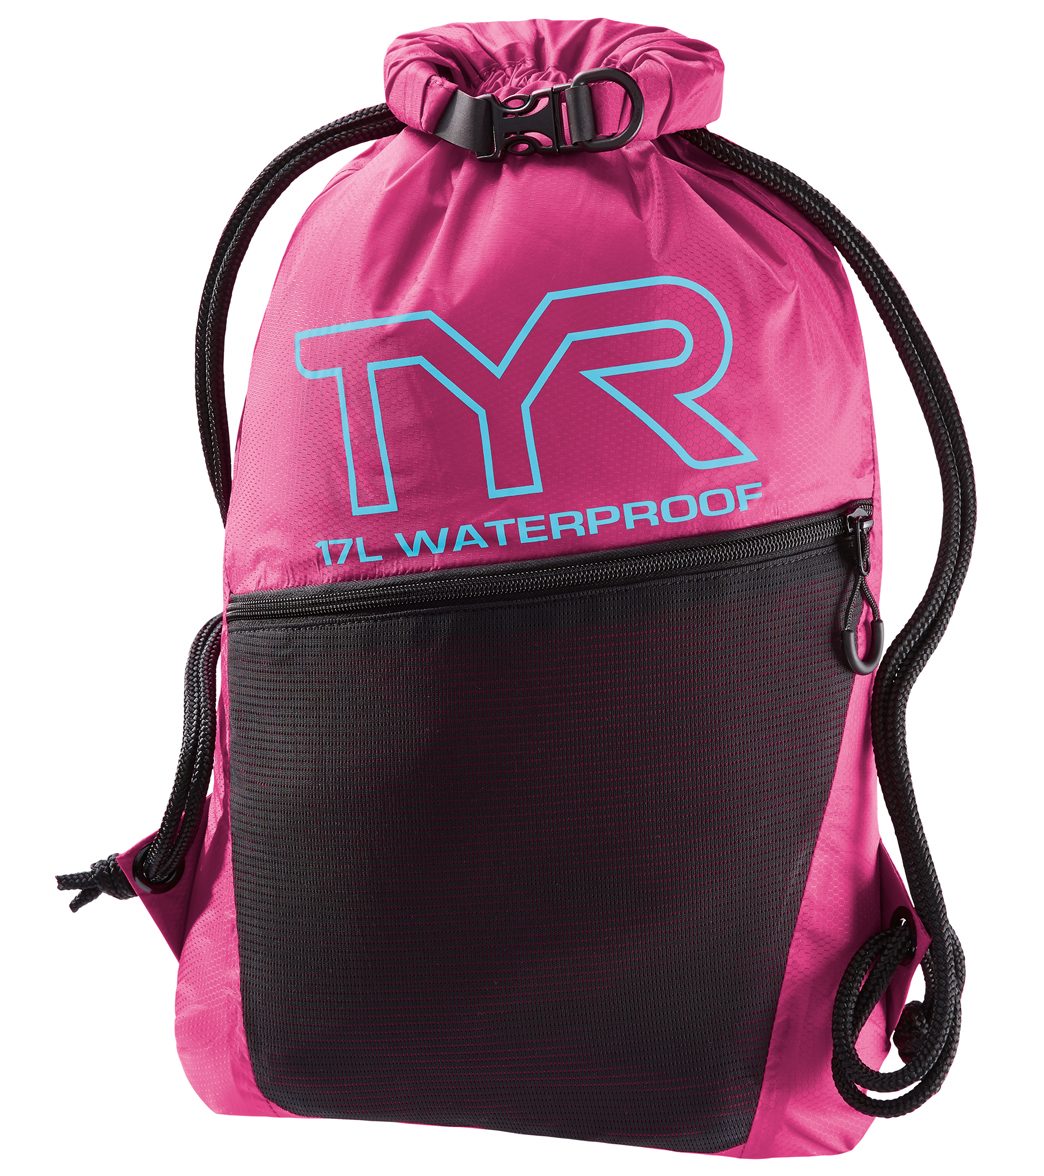 TYR Alliance Waterproof Draw String Sack Pack - Pink Nylon - Swimoutlet.com